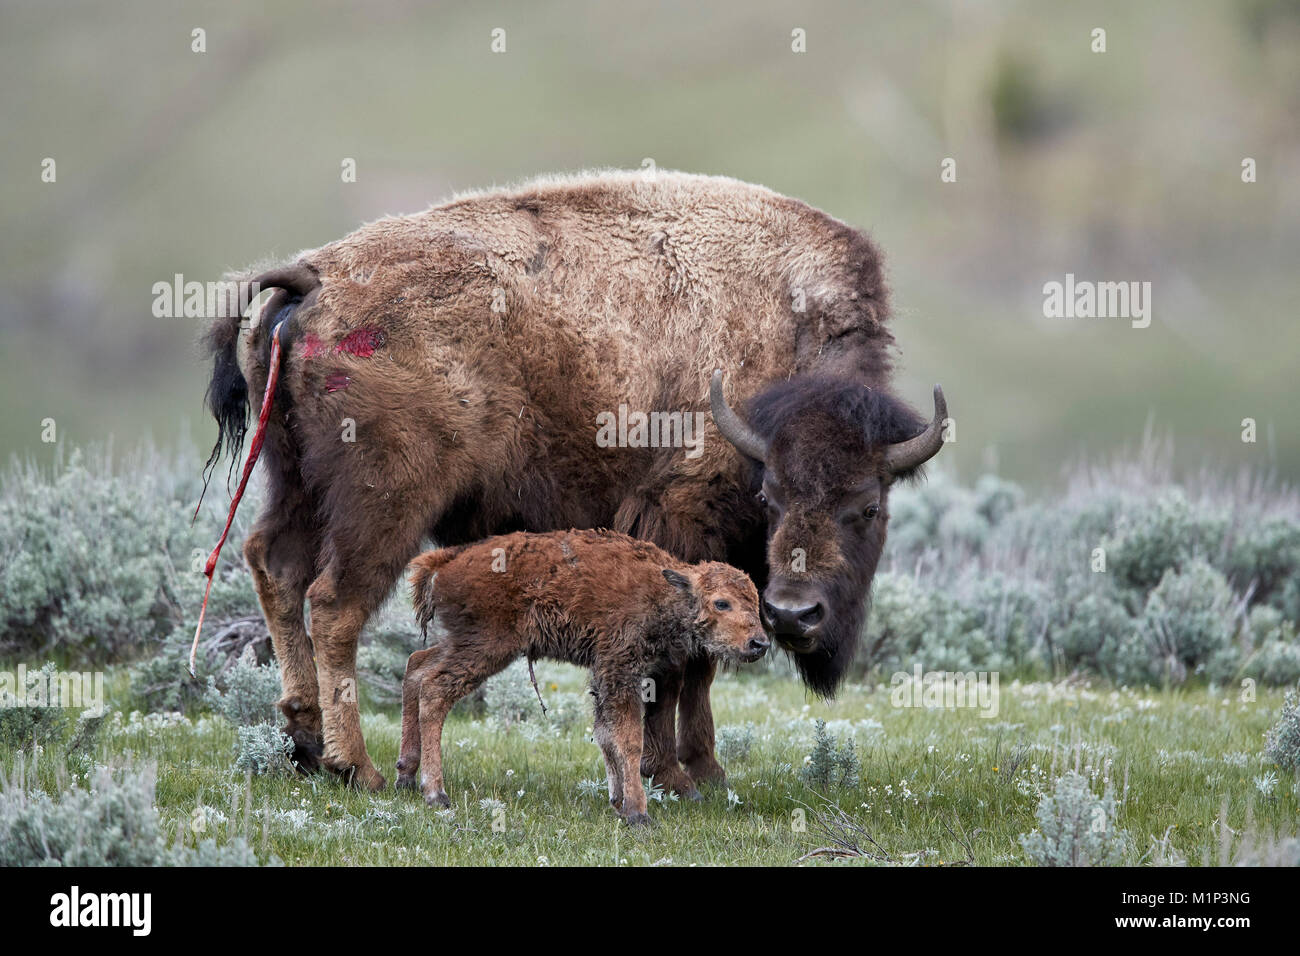 Bison (Bison bison) cow and newborn calf, Yellowstone National Park, Wyoming, United States of America, North America Stock Photo